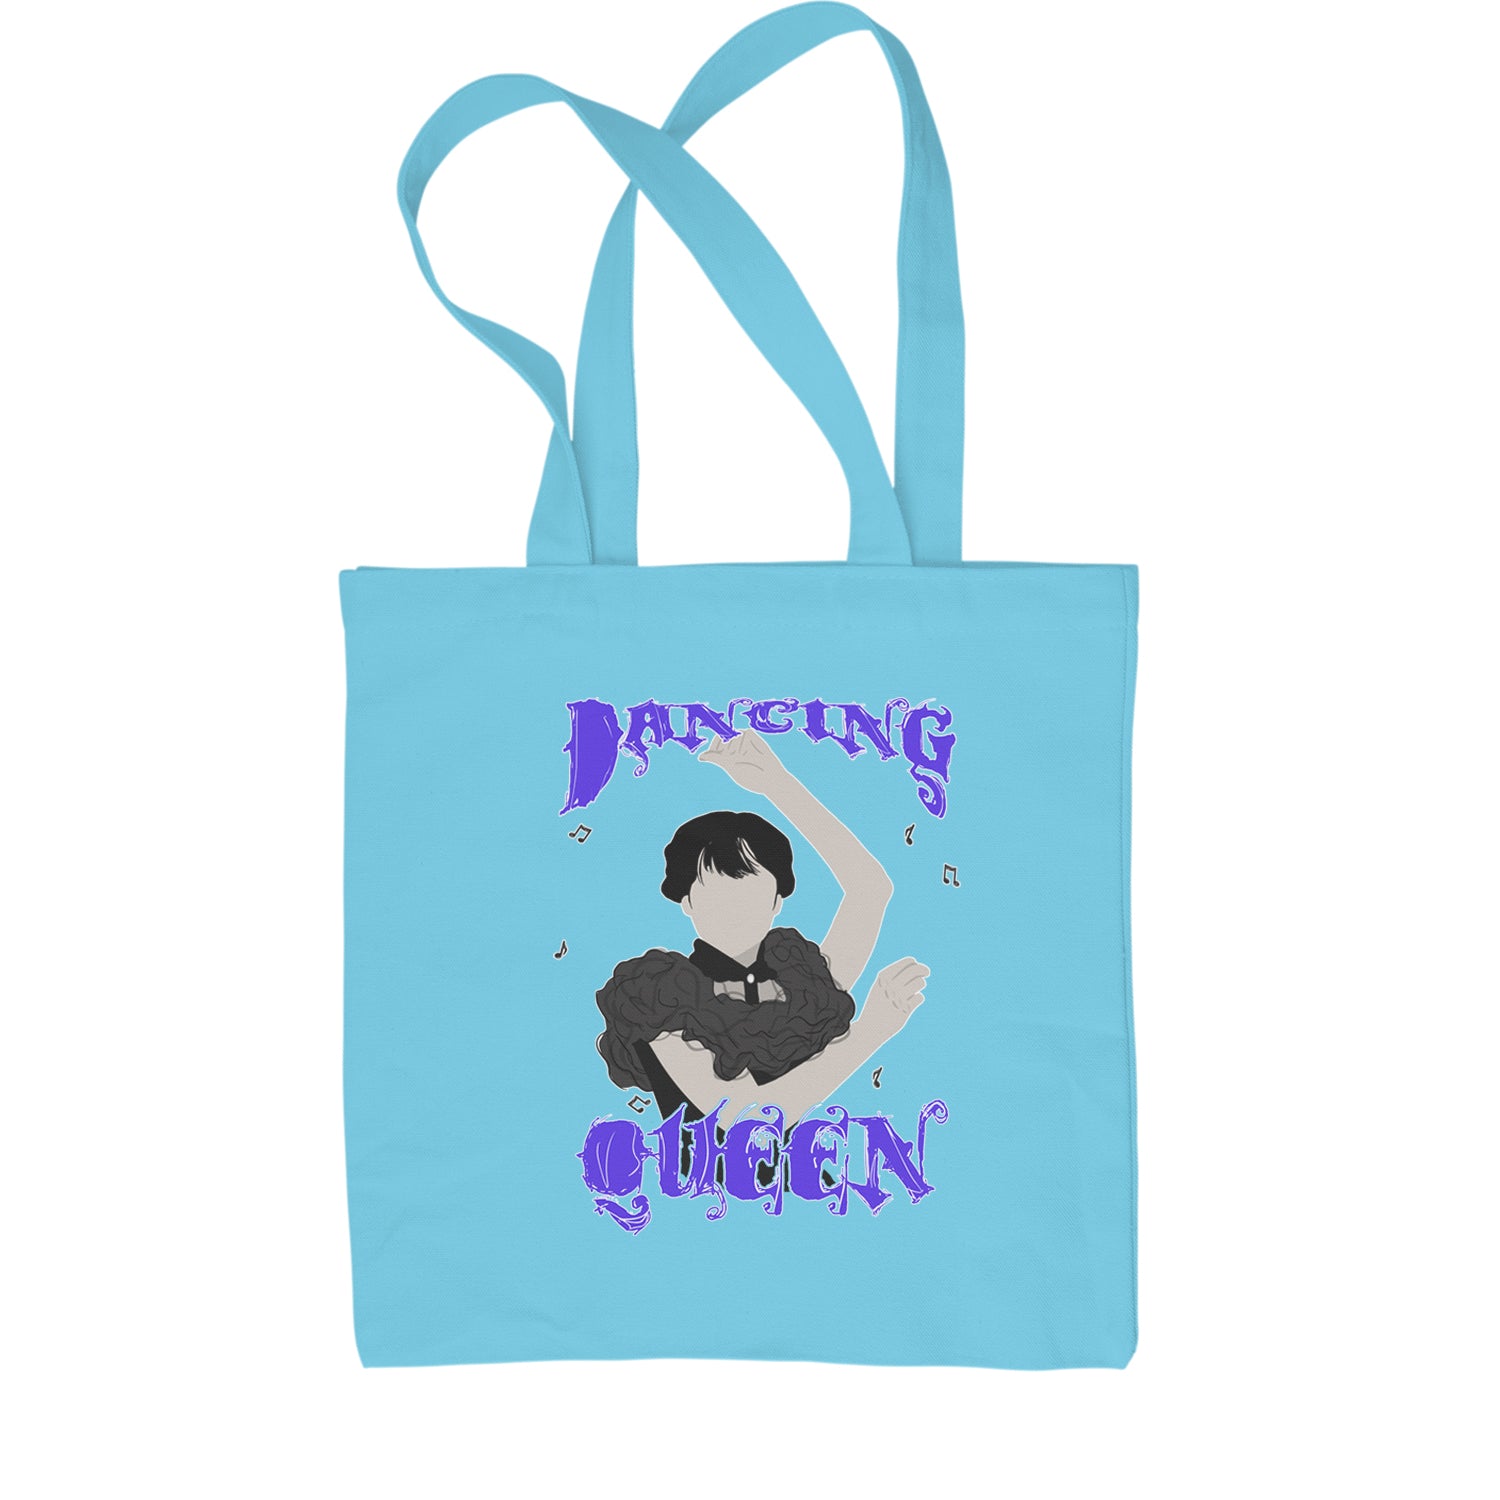 Wednesday Dancing Queen Shopping Tote Bag black, On, we, wear, wednesdays by Expression Tees